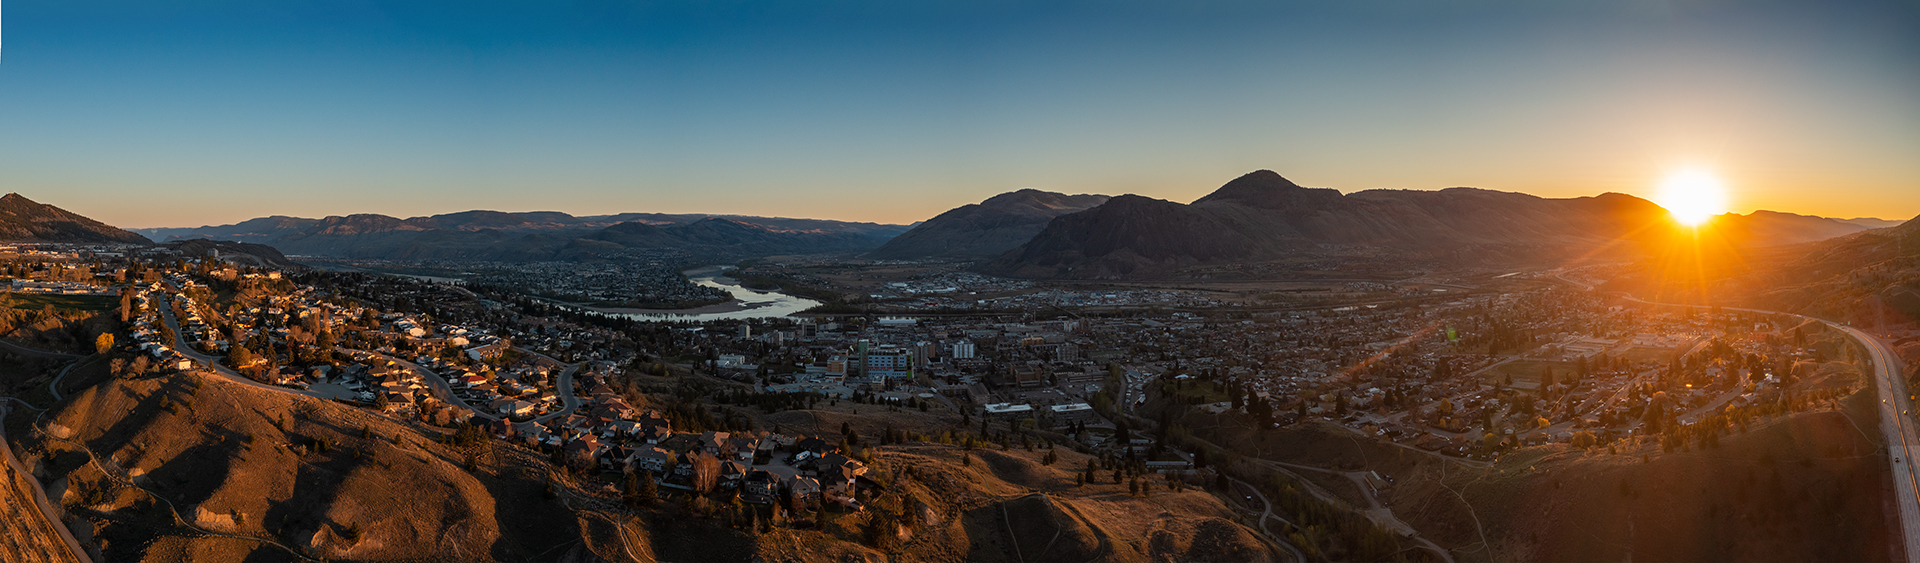 Kamloops City Aerial bright sun rising over mountains and blue sky